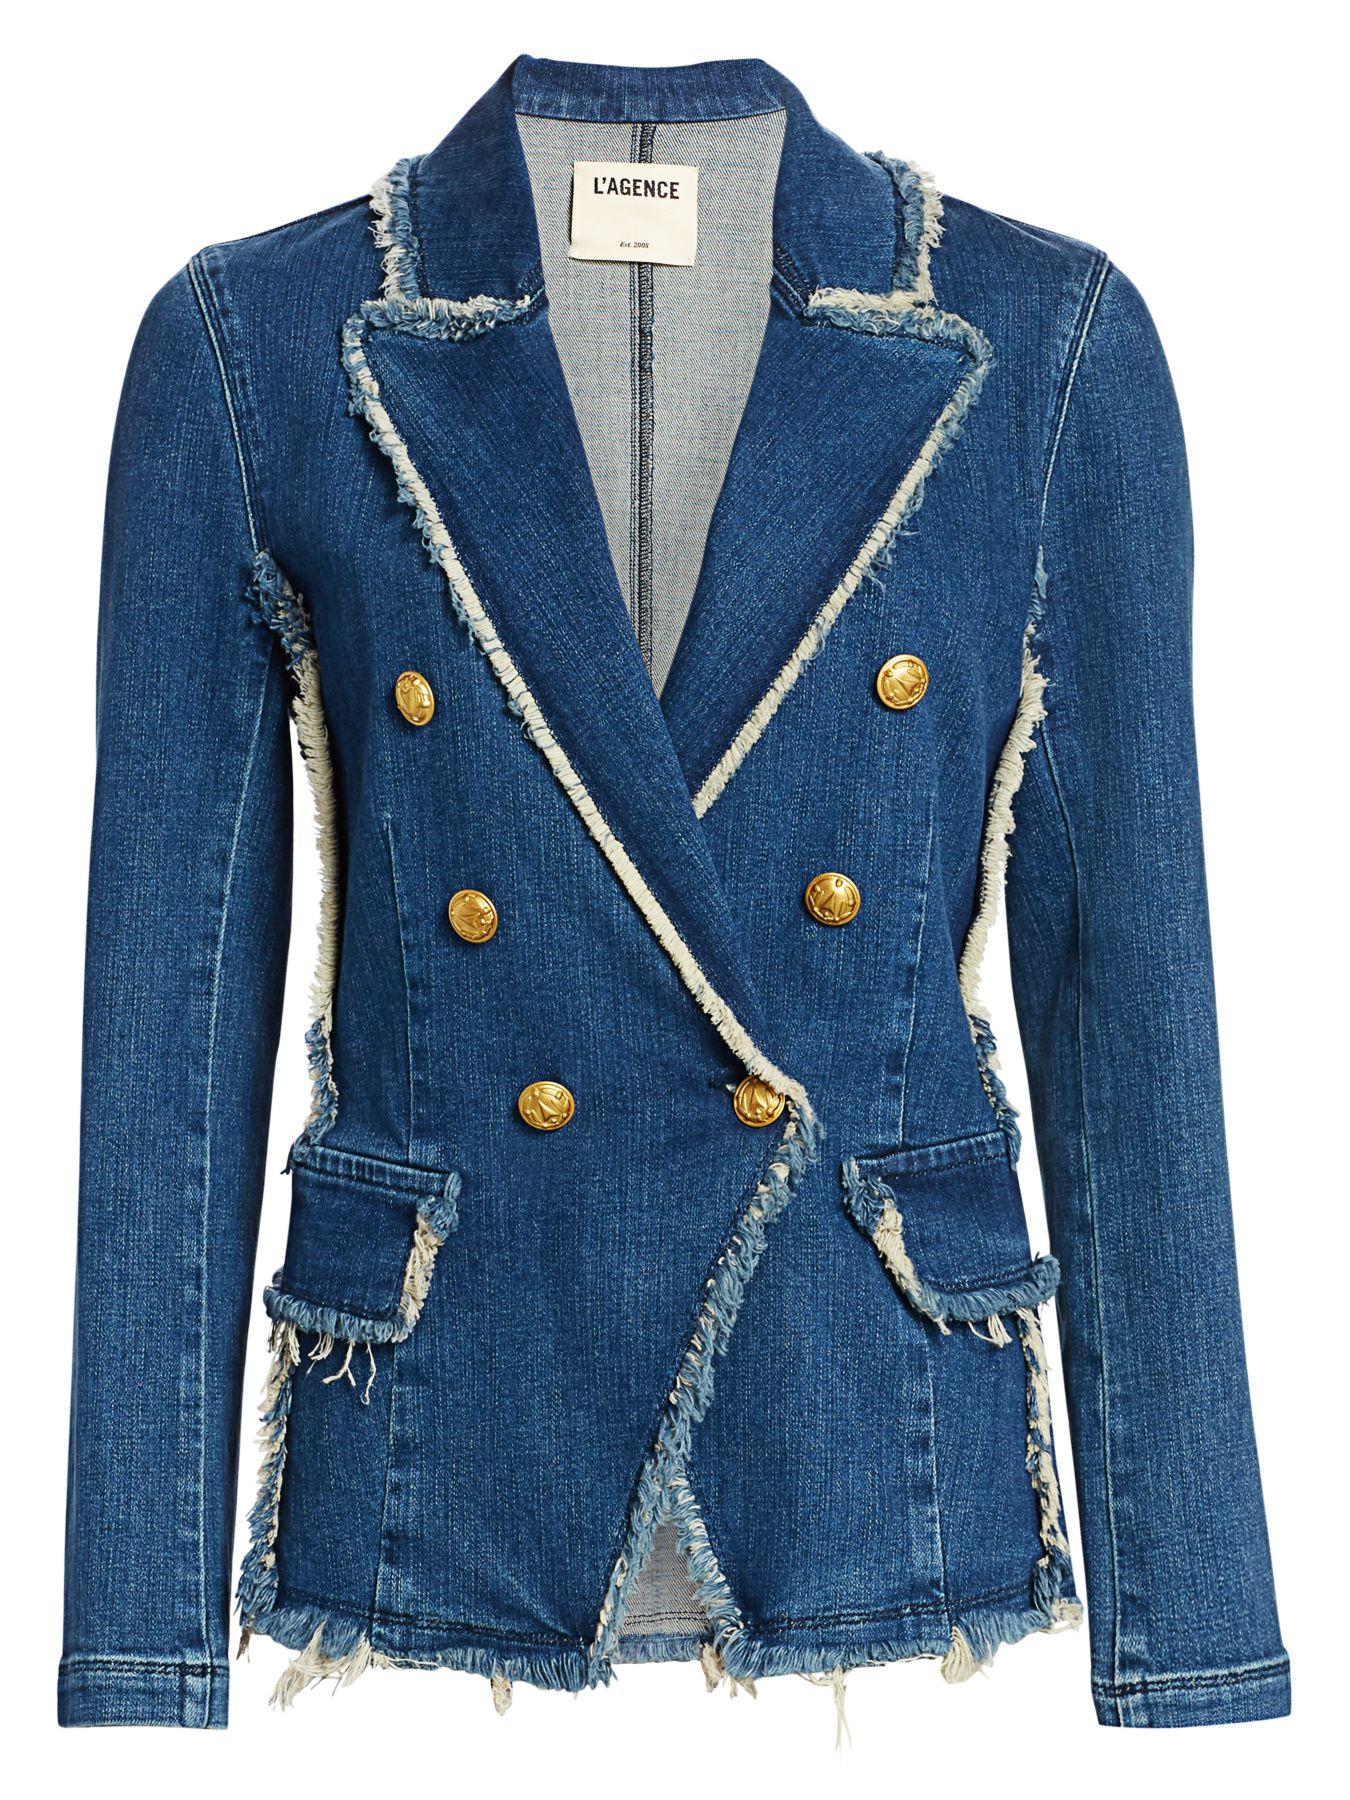 L'Agence Kaydence Double-breasted Frayed Denim Blazer in Blue - Save 30 ...